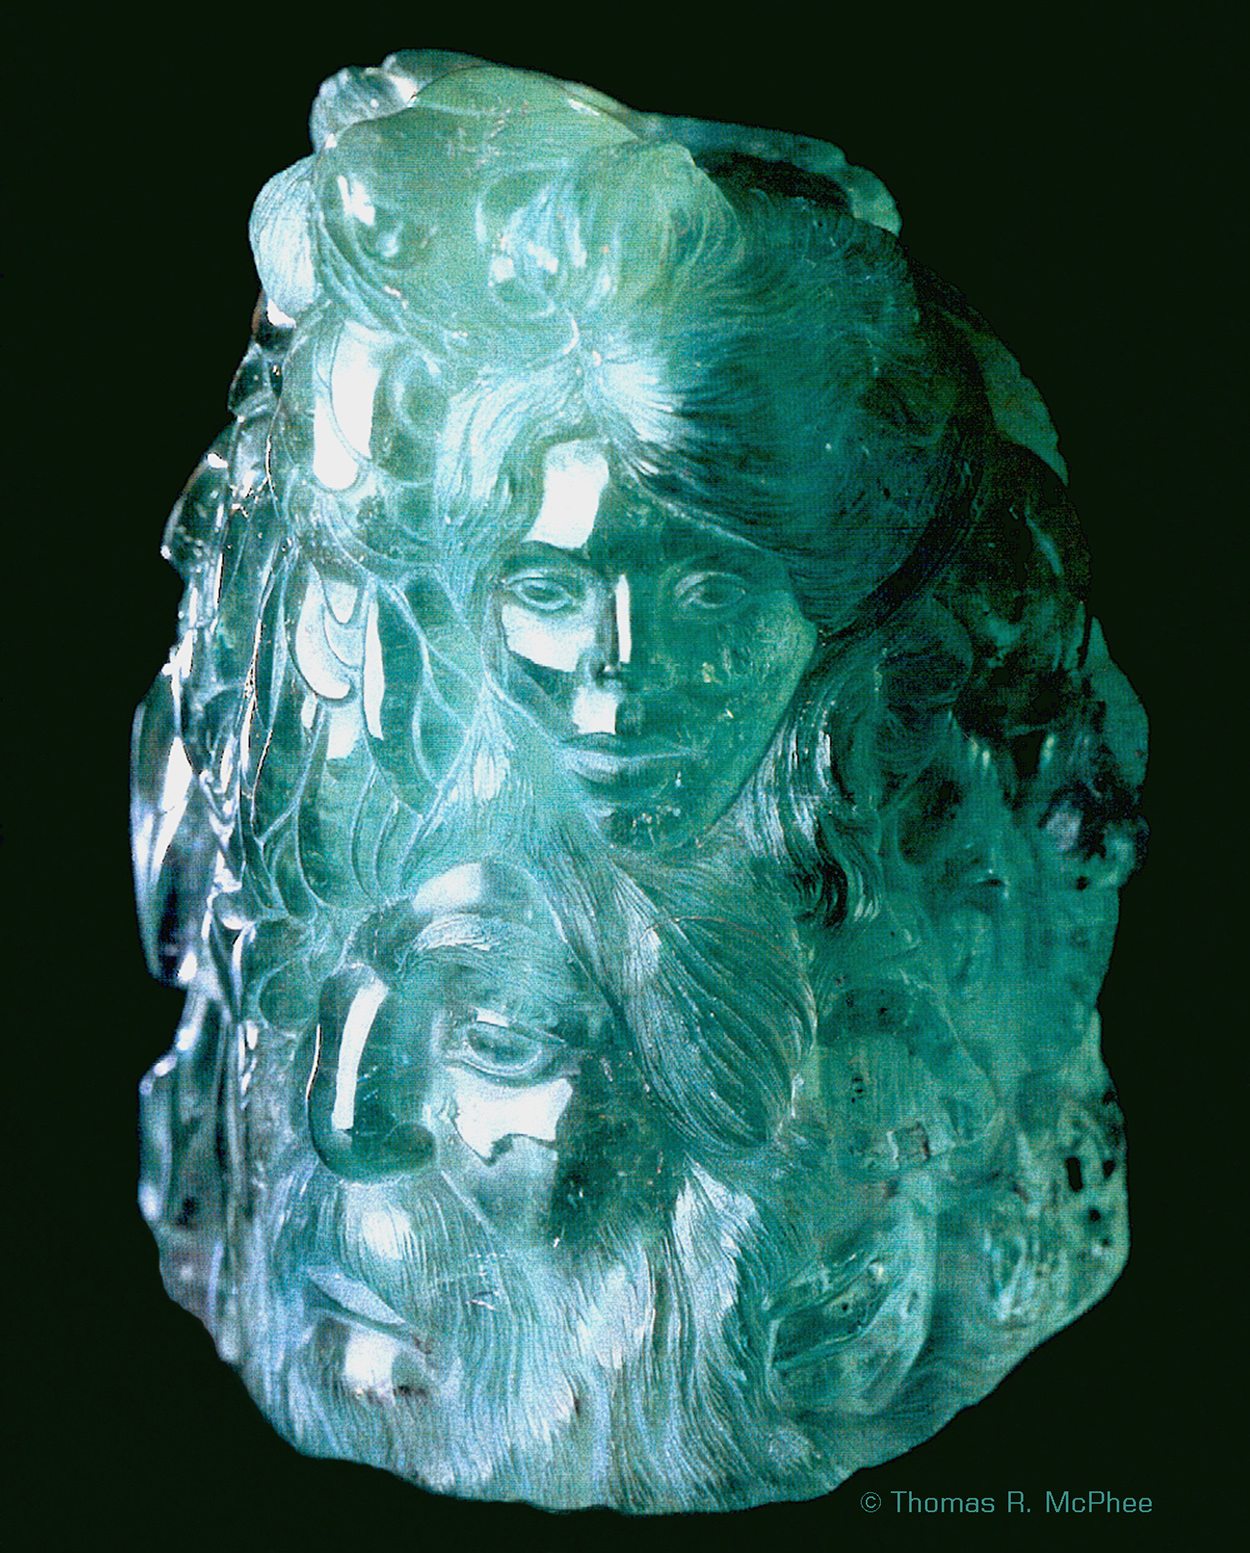  Thomas R. McPhee spent more than six months designing and carving the Emerald Crystal from the famous Muzo Mine in Colombia.&nbsp; The main body of the stone is carved in high relief and contains intertwined figures representing the various aspects 